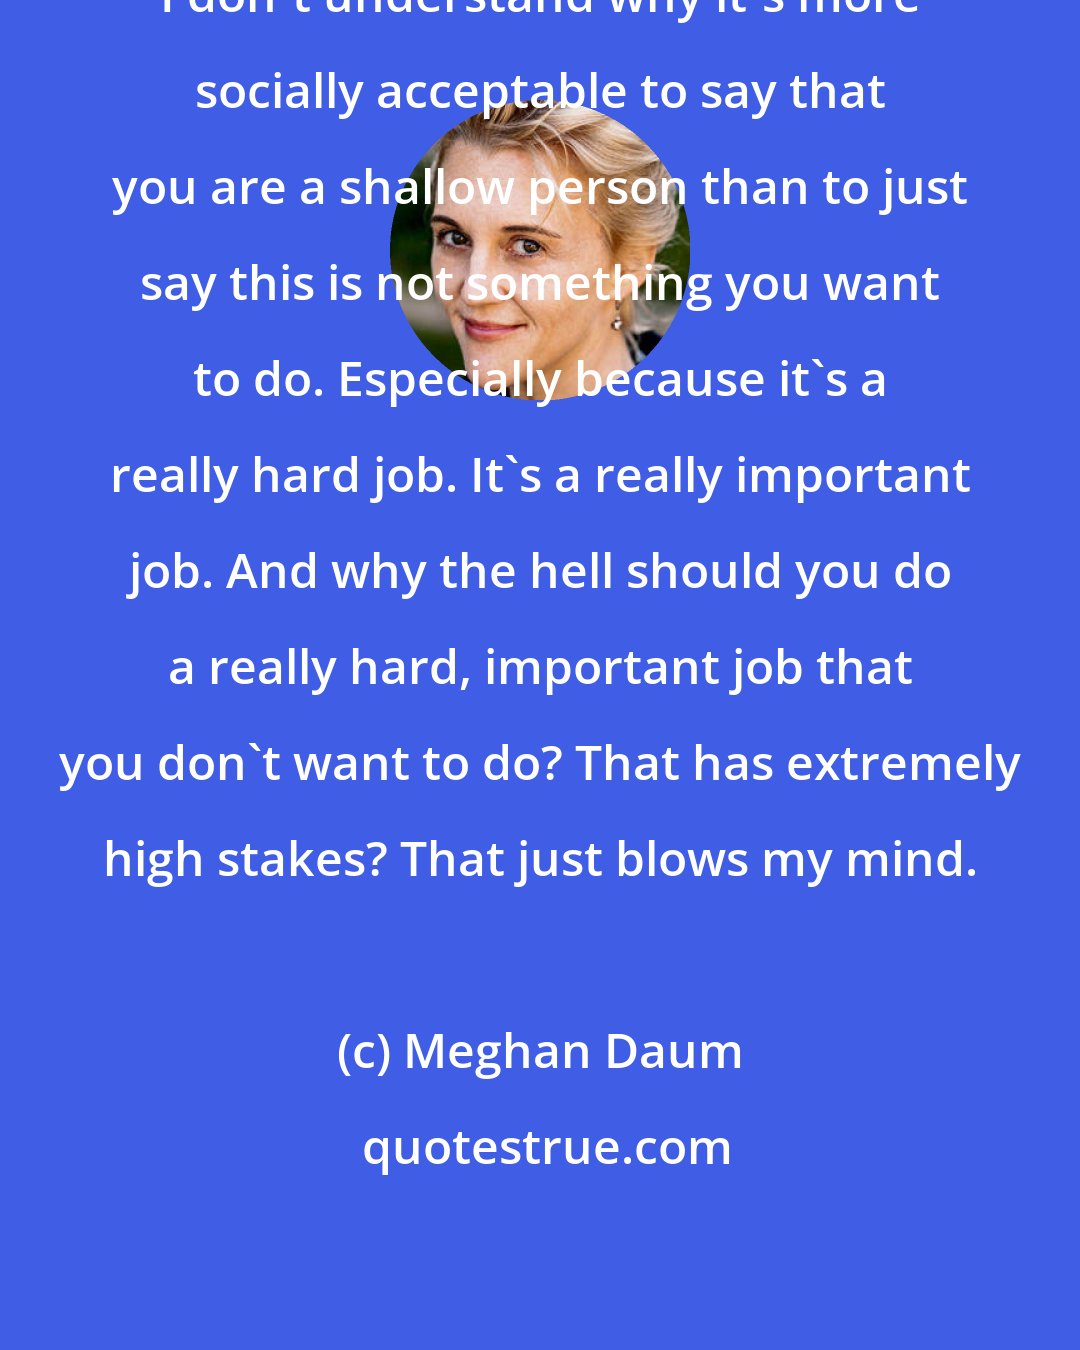 Meghan Daum: I don't understand why it's more socially acceptable to say that you are a shallow person than to just say this is not something you want to do. Especially because it's a really hard job. It's a really important job. And why the hell should you do a really hard, important job that you don't want to do? That has extremely high stakes? That just blows my mind.